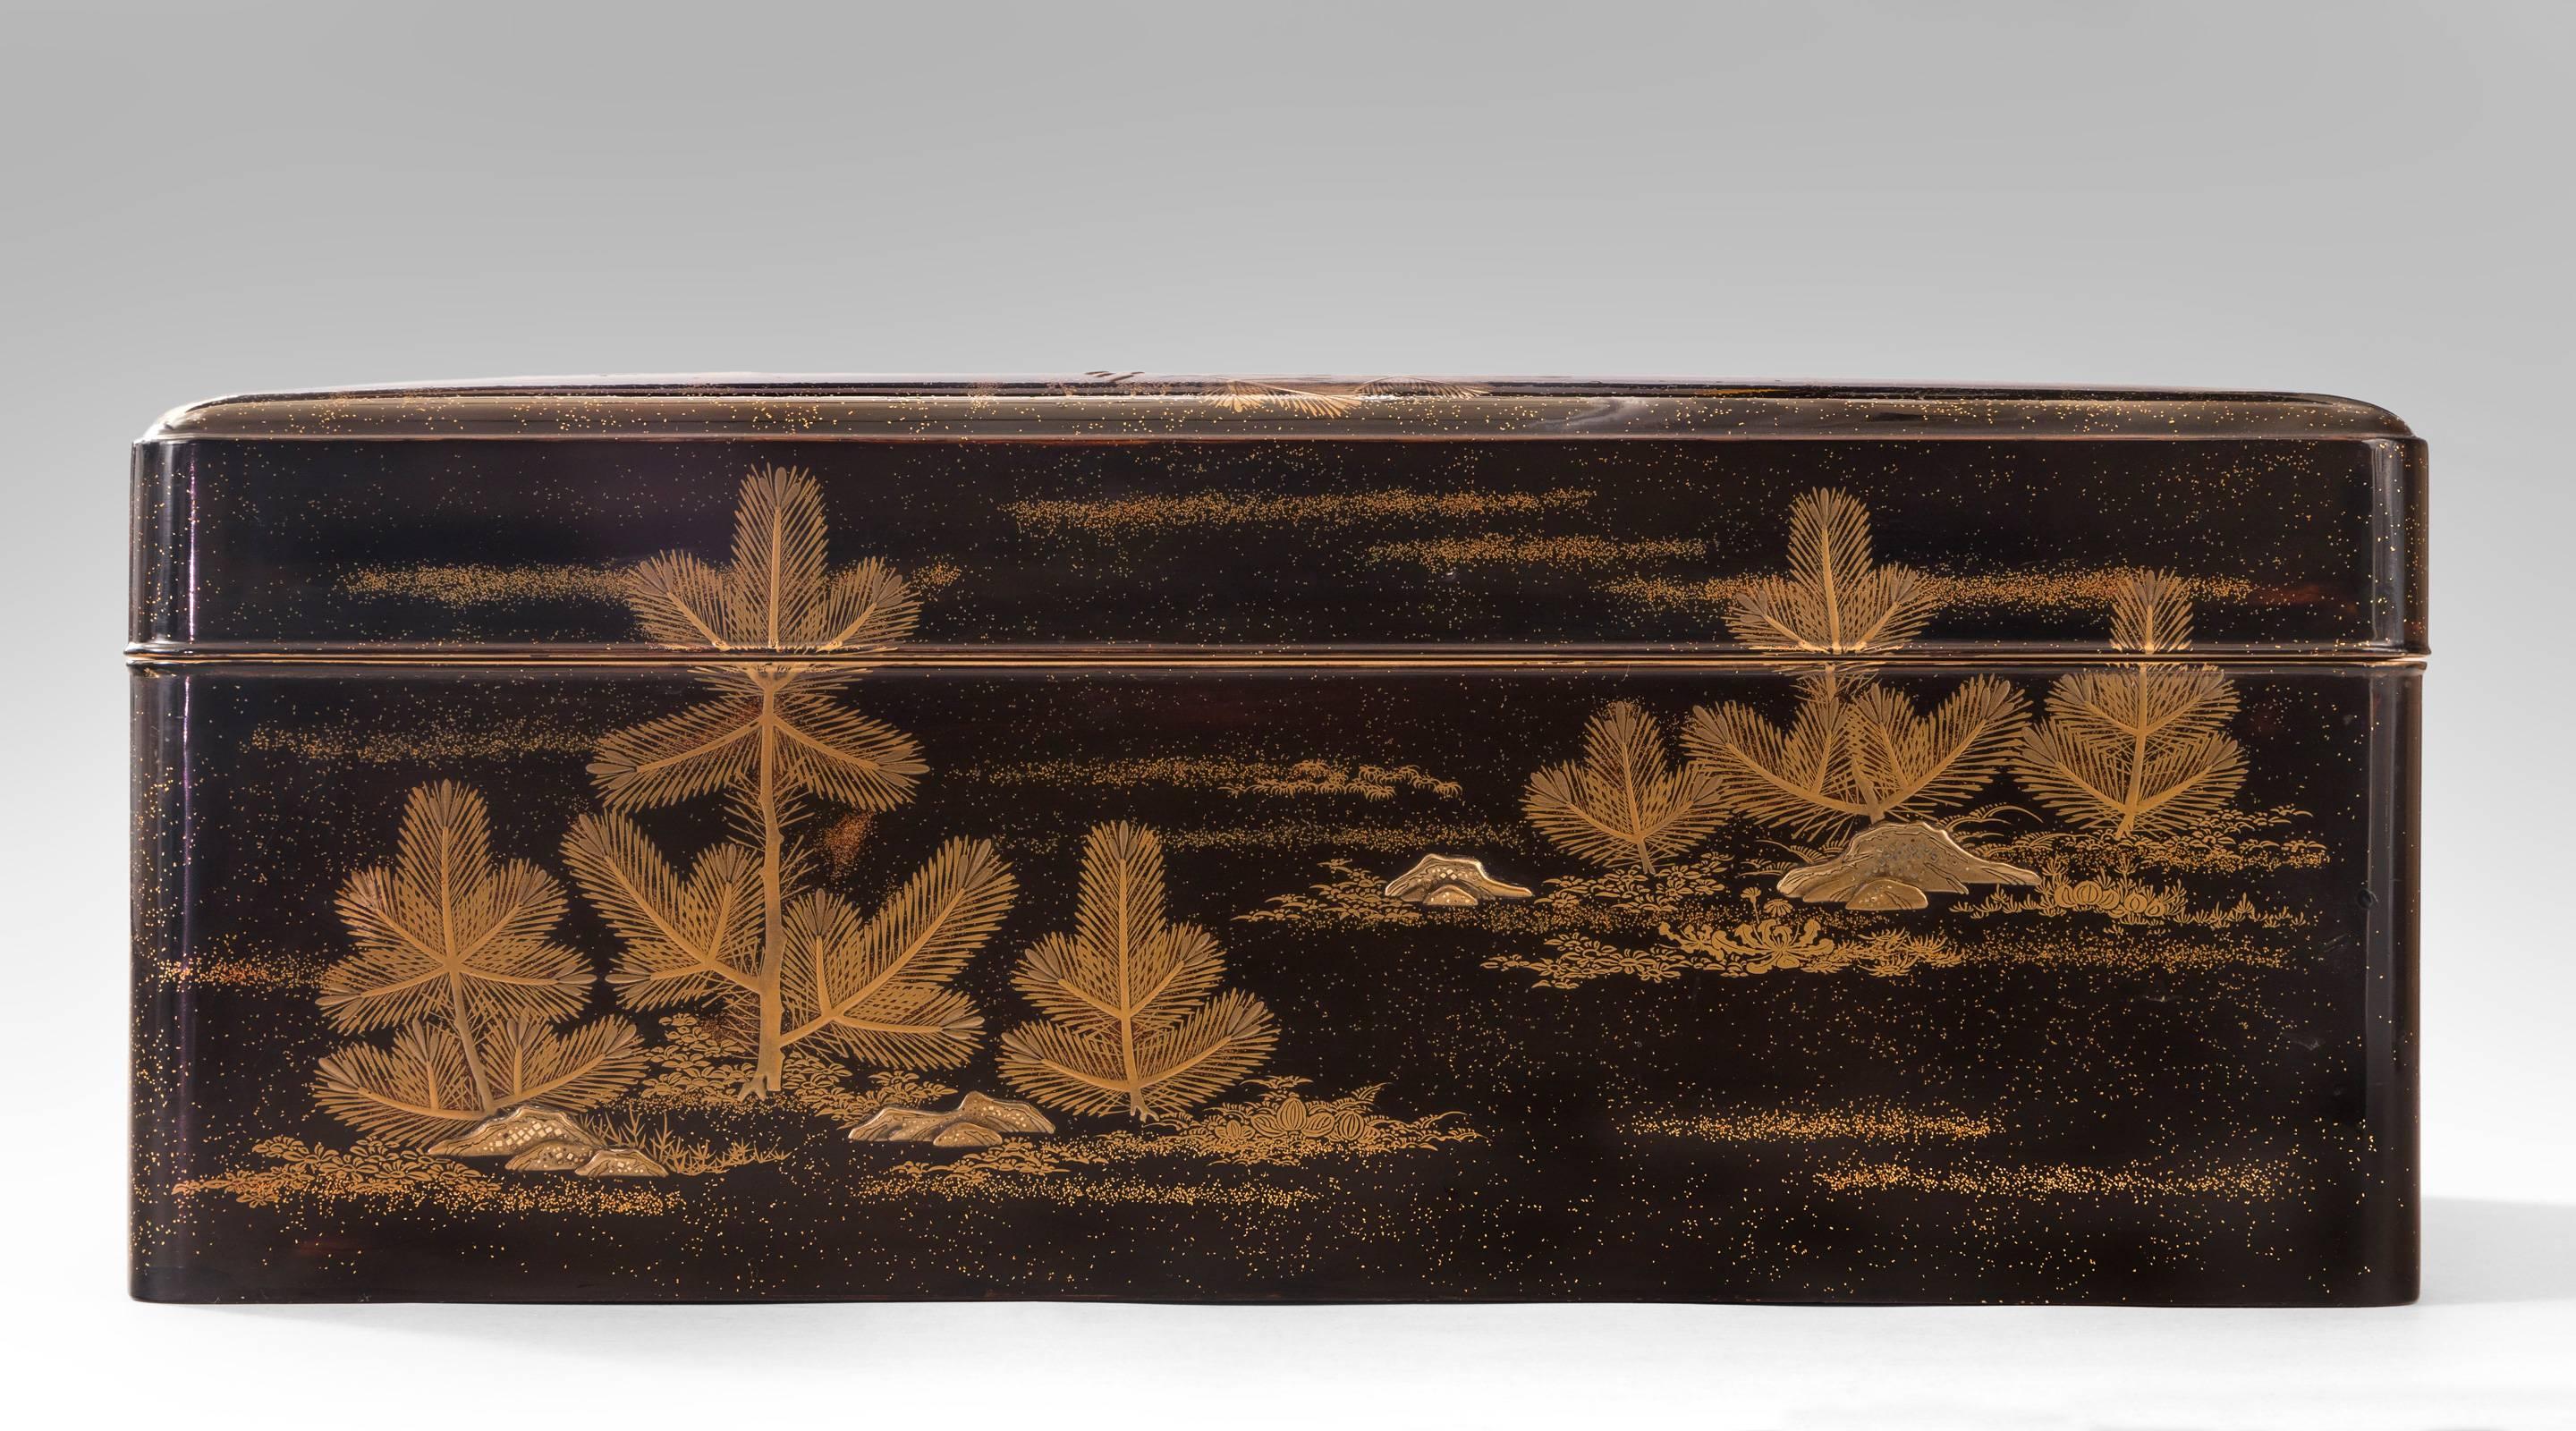 A Large Japanese Gold Lacquer Box (Bunko) Depicting Cranes and Pine Trees For Sale 1